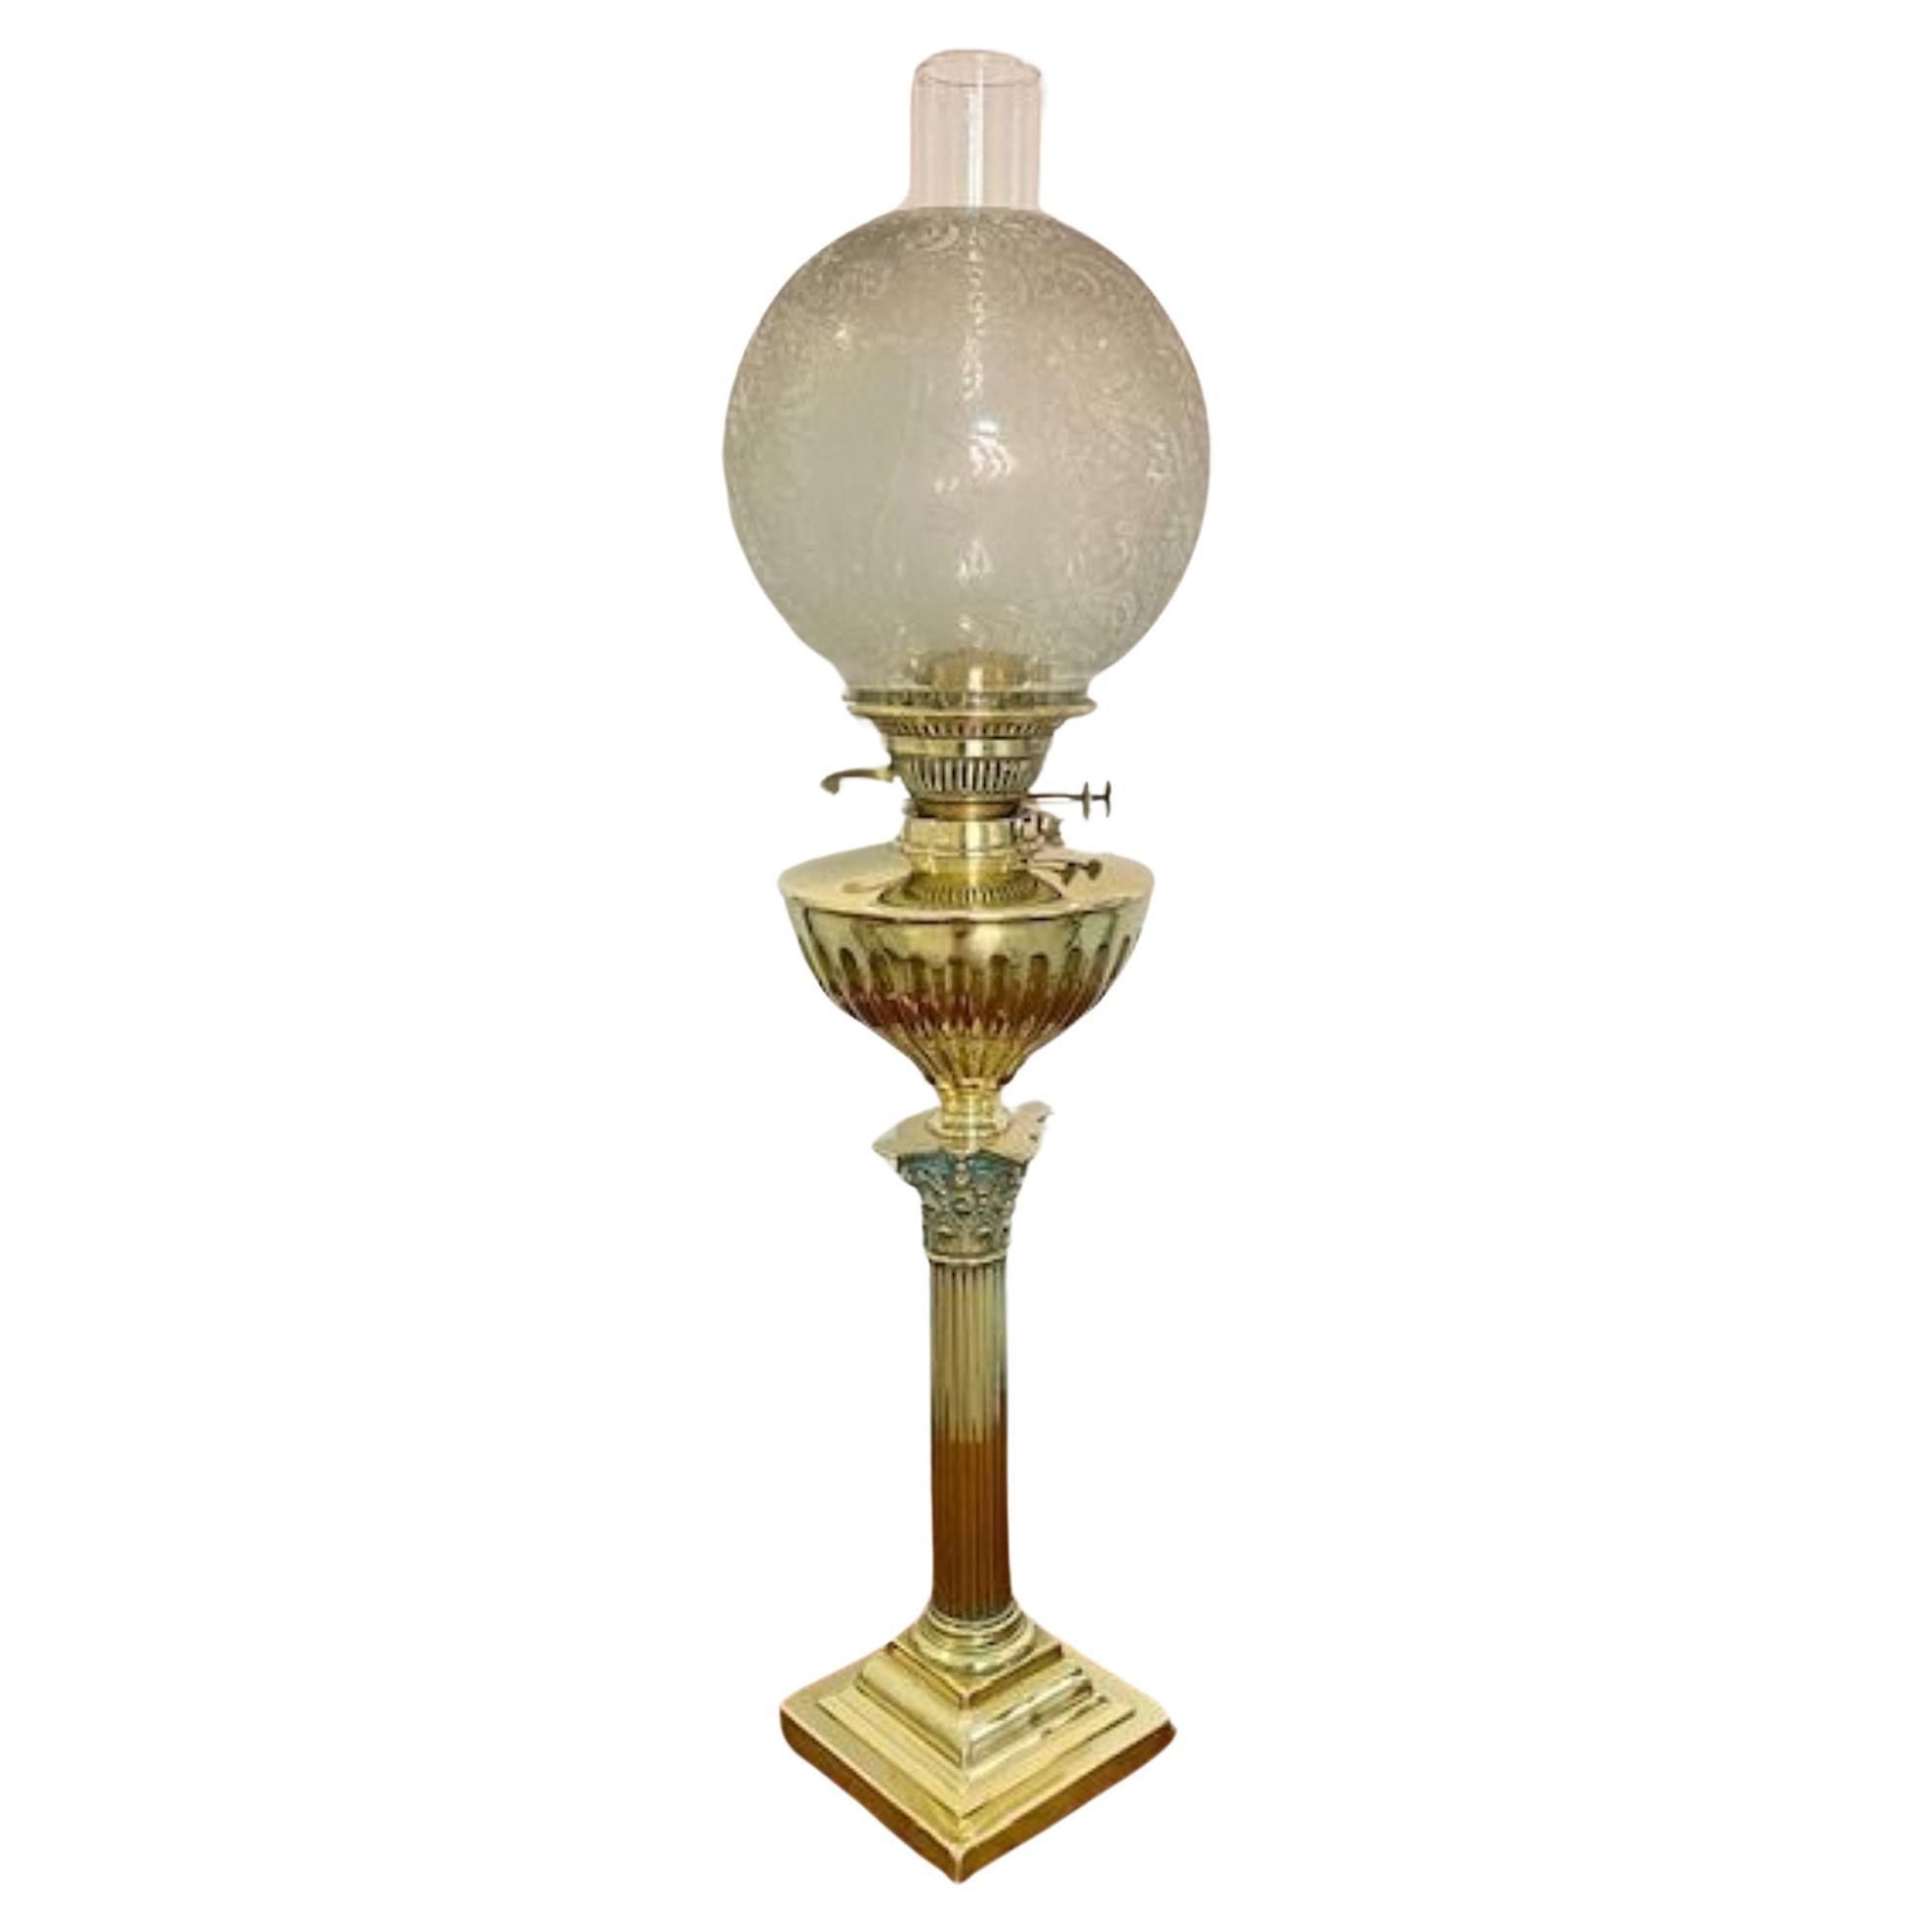 Quality antique Victorian brass oil lamp For Sale